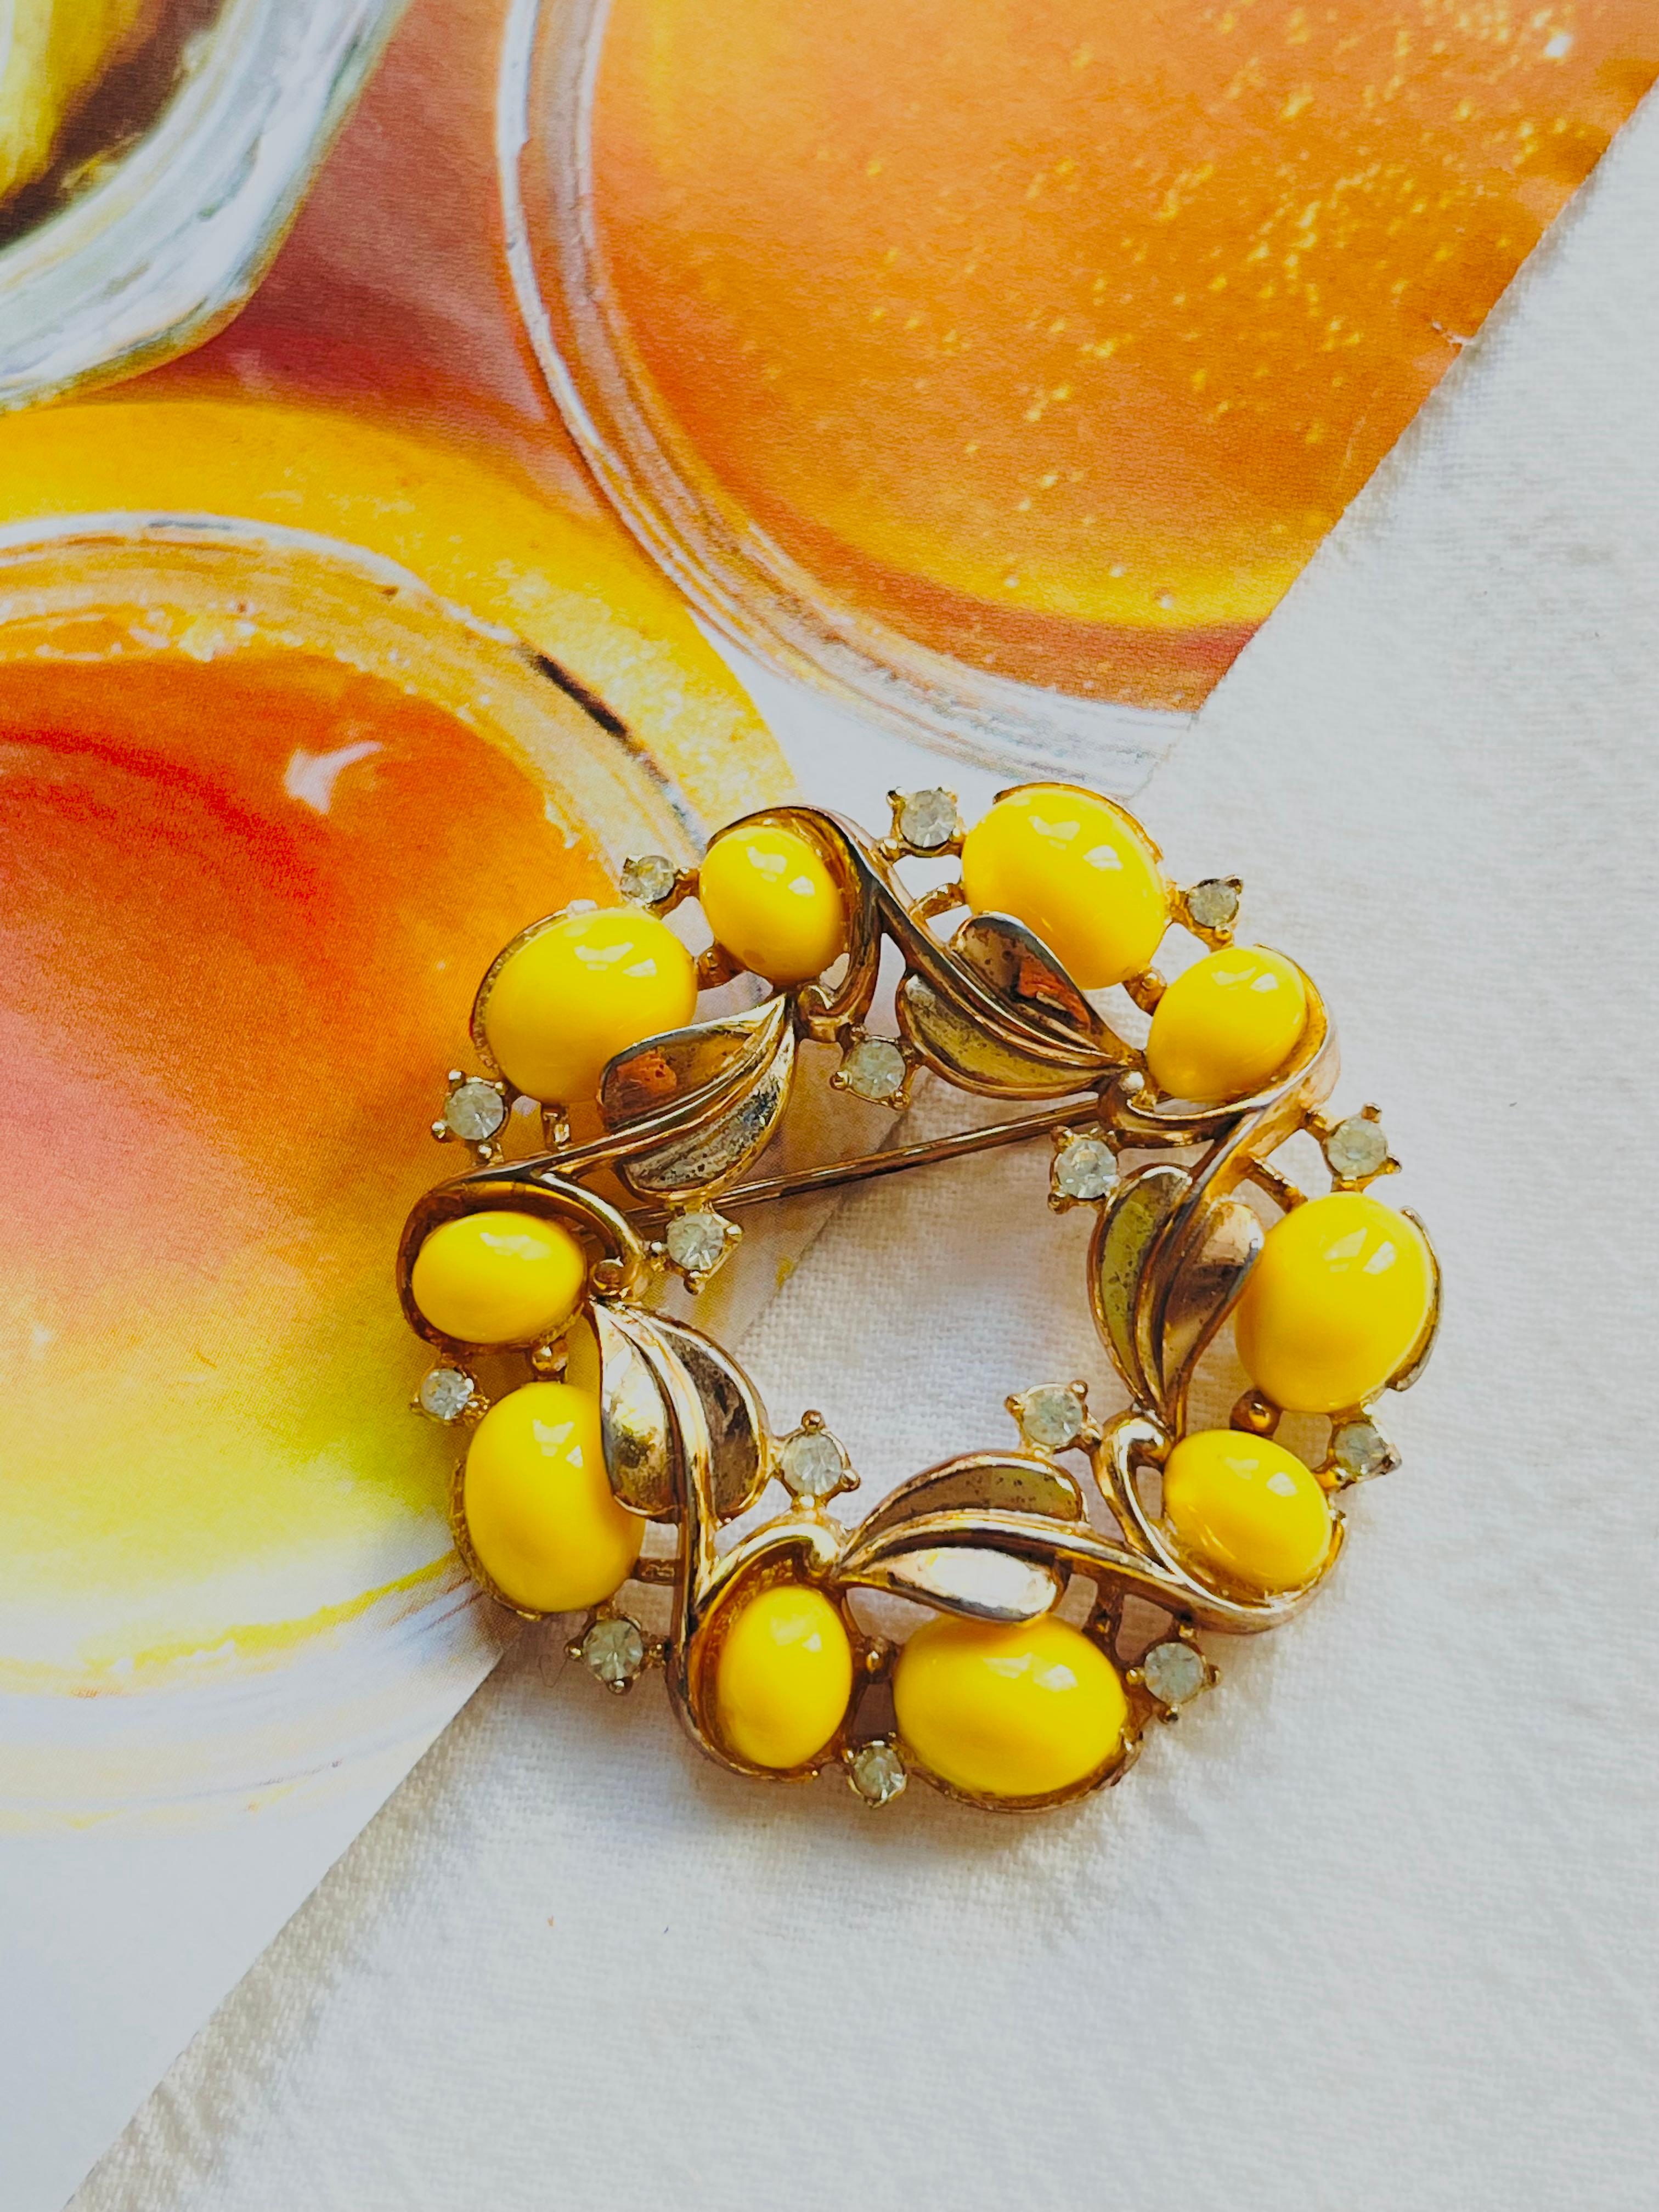 Crown Trifari 1950s Circle Yellow Cabochon Wreath Flower Leaf Crystals Brooch, Gold Tone

Good condition. Some light scratches and colour loss at back, since over 70 years. Still beautiful and good to wear. 

A very beautiful brooch, signed at the